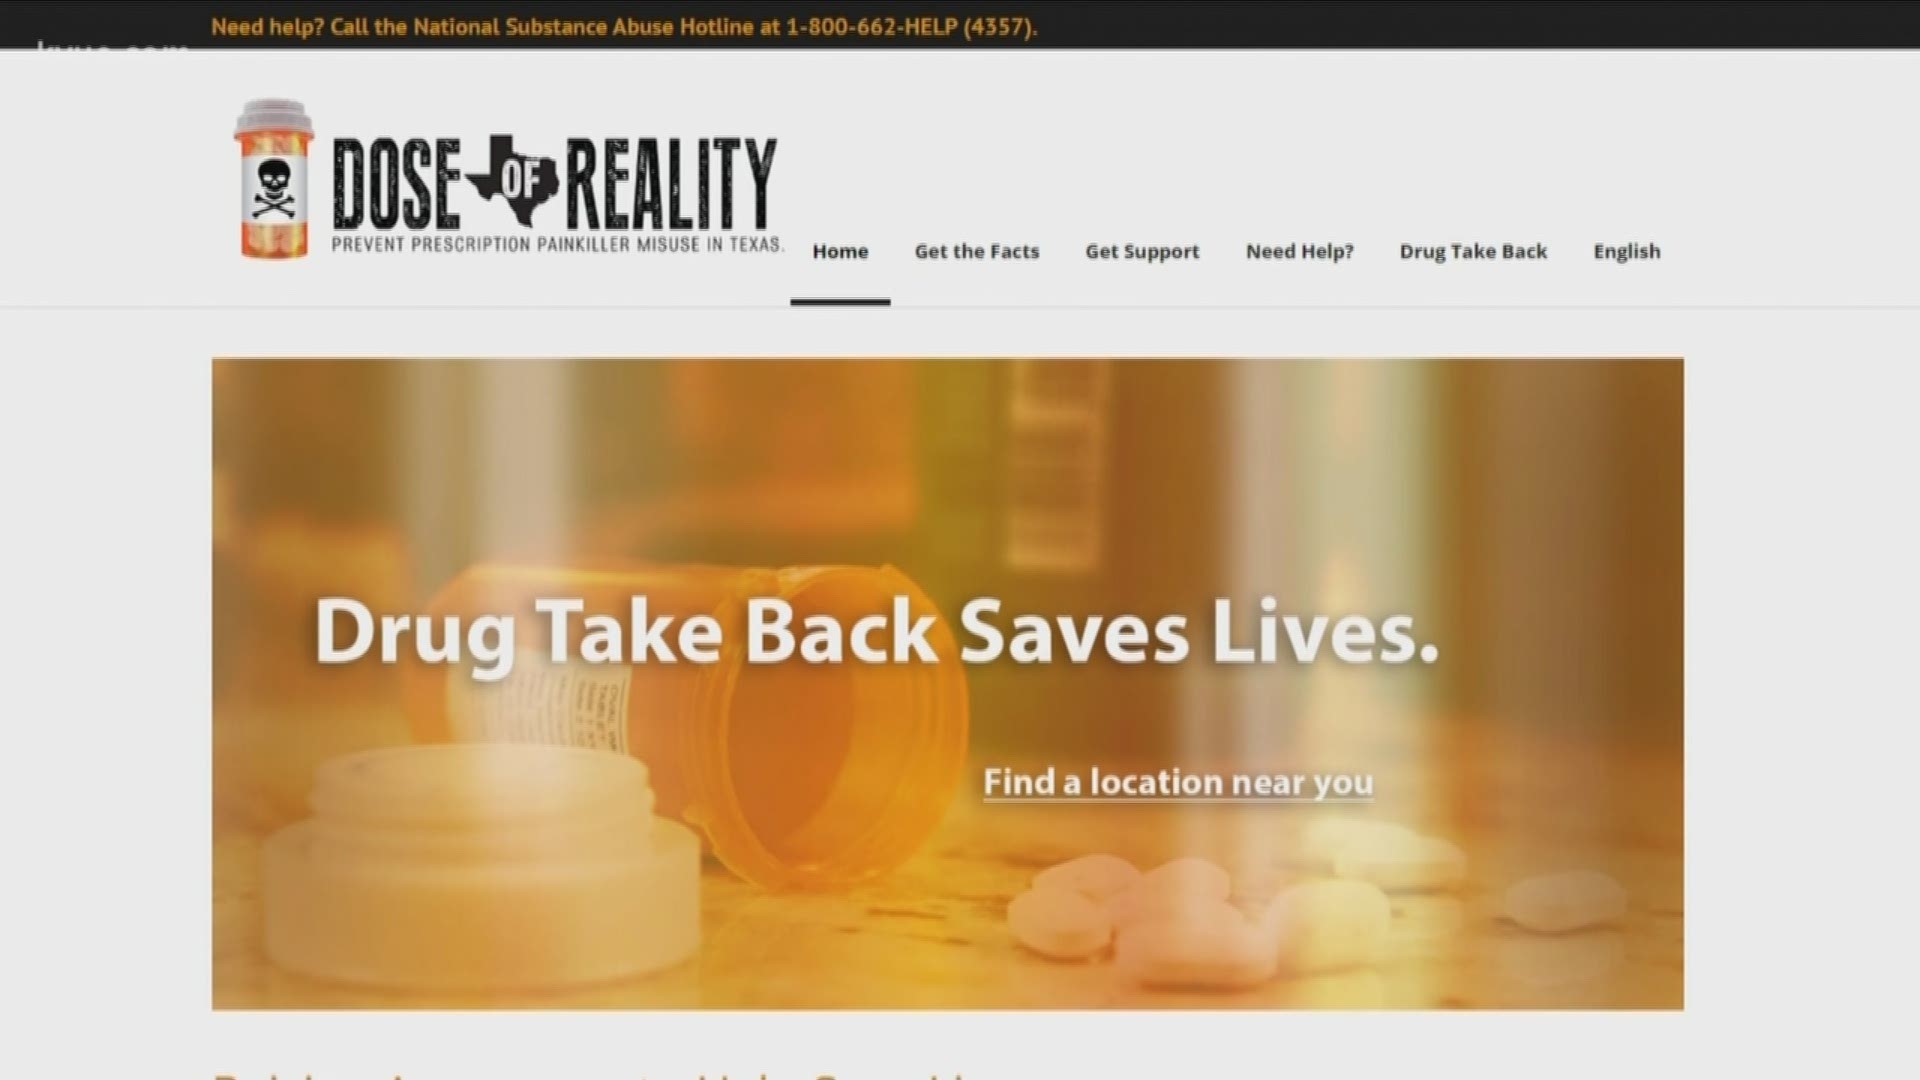 Texas has a new website designed to offer help against opioid addiction. It's call Dose of Reality.